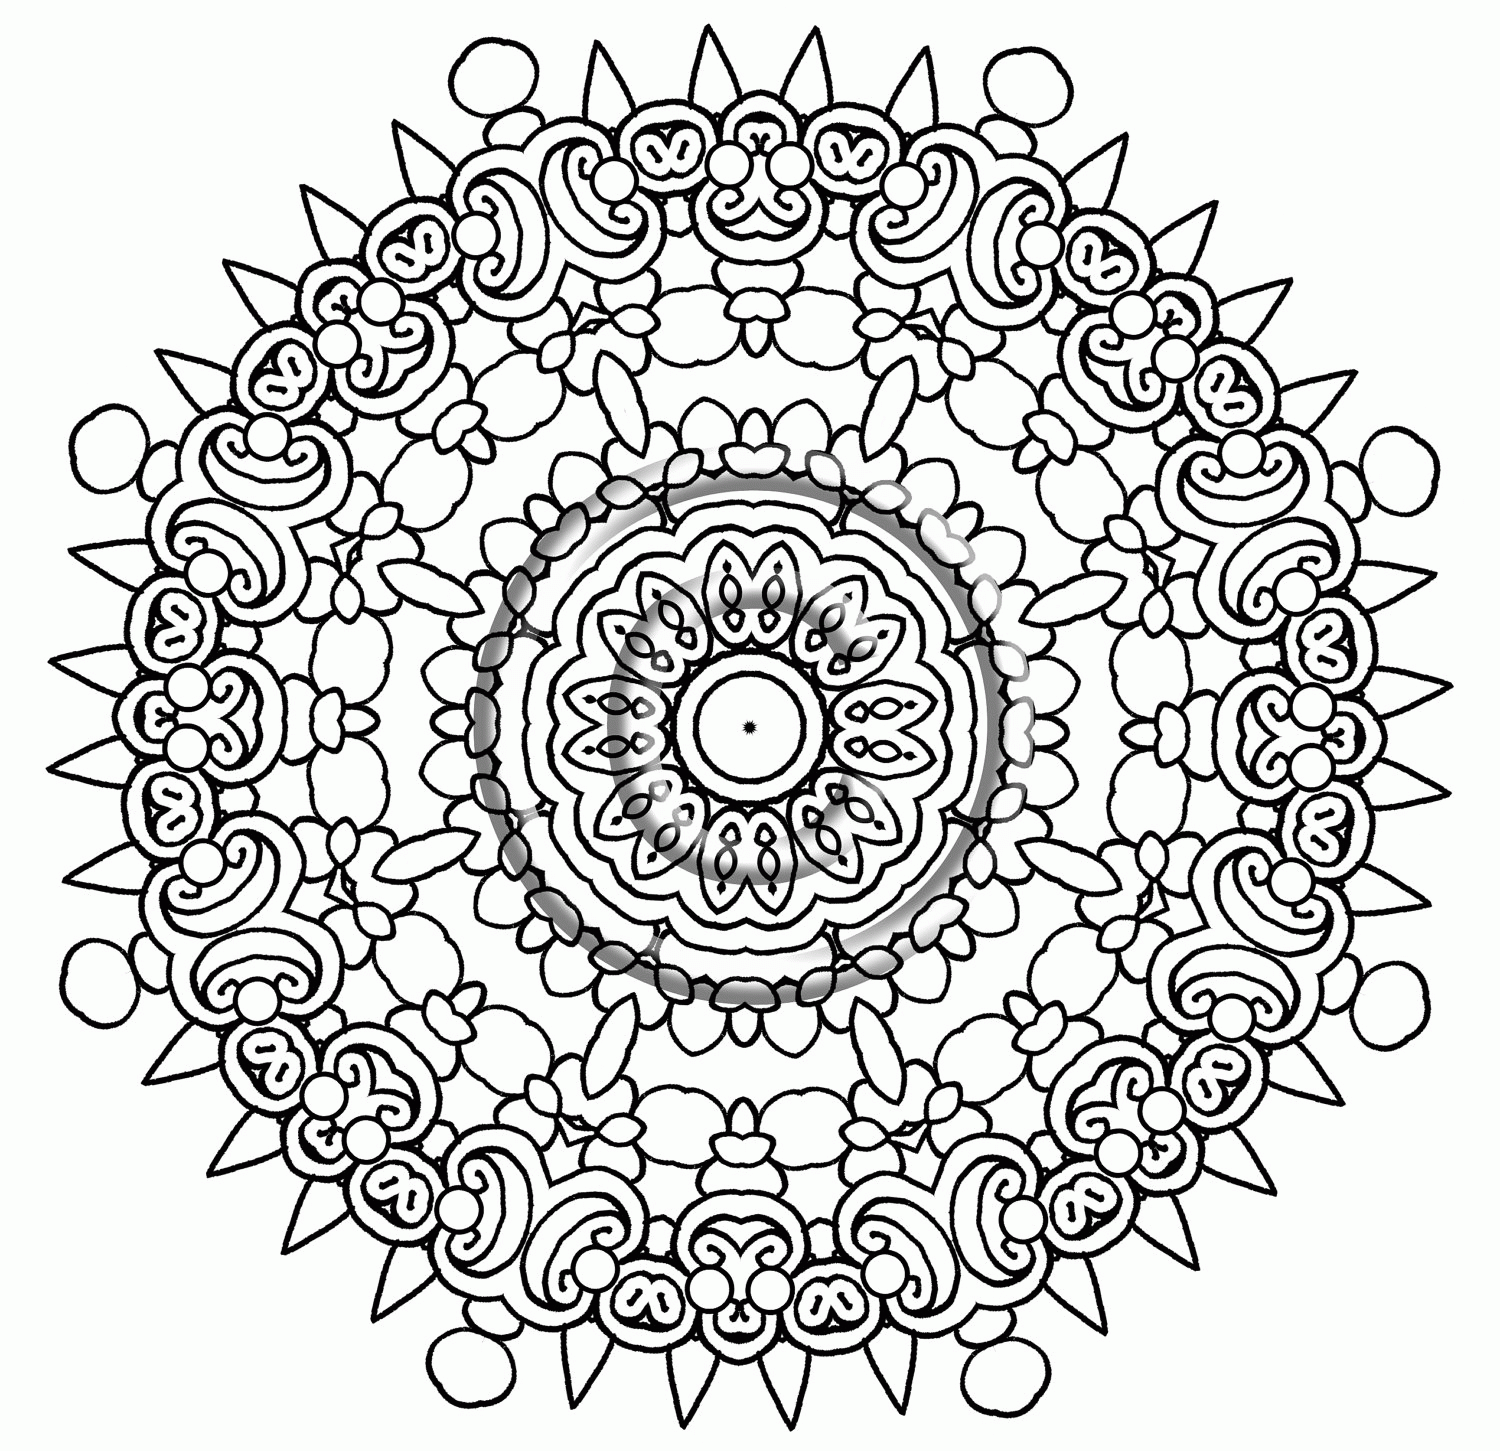 Intricate Mandala Coloring Pages - Coloring Home